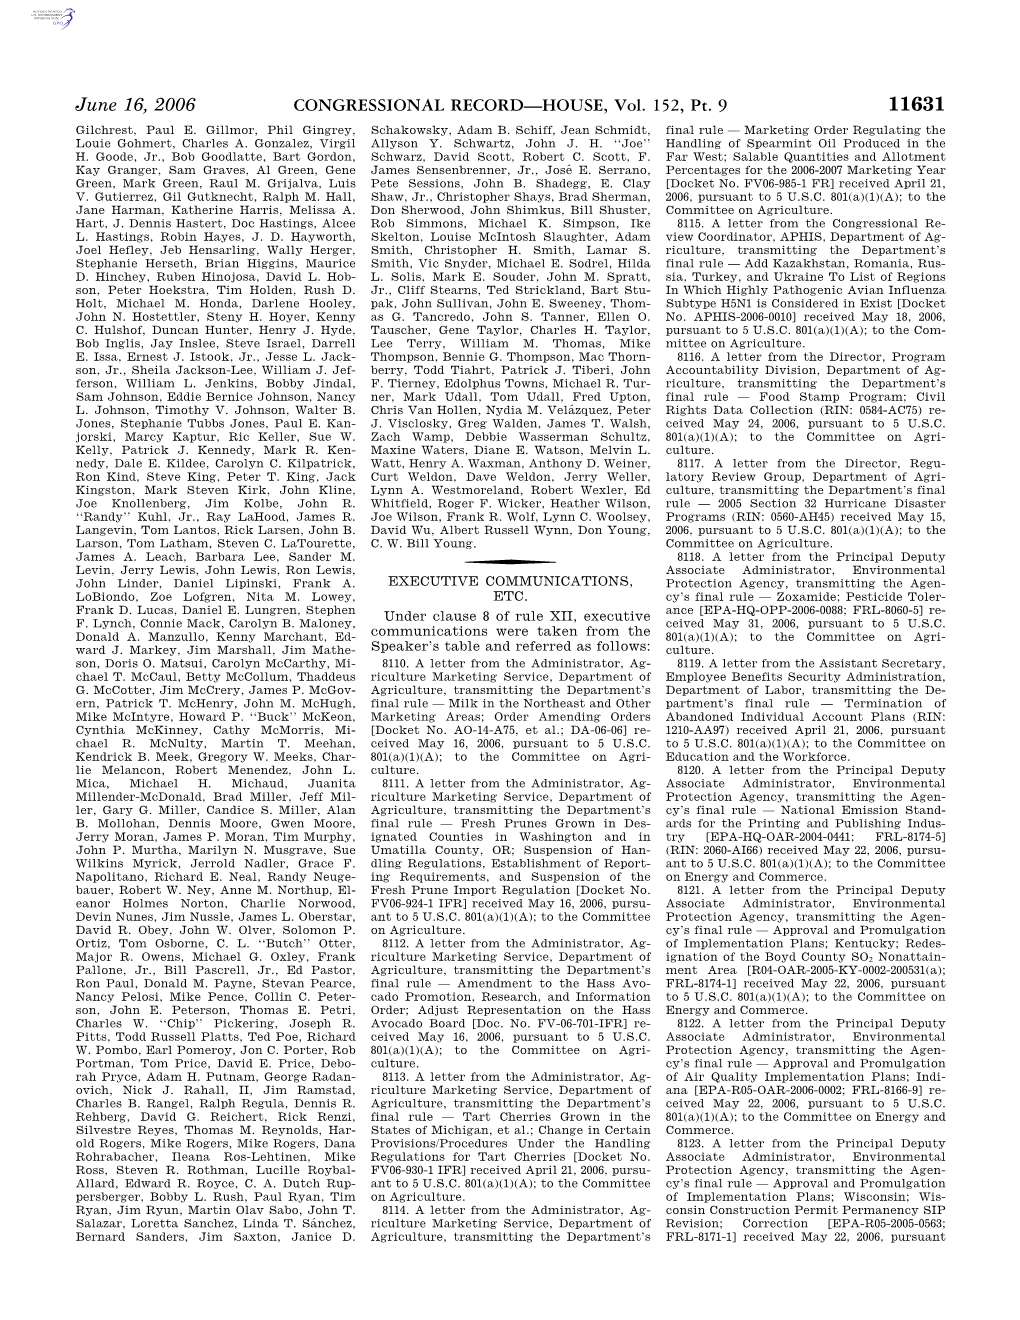 CONGRESSIONAL RECORD—HOUSE, Vol. 152, Pt. 9 June 16, 2006 to 5 U.S.C